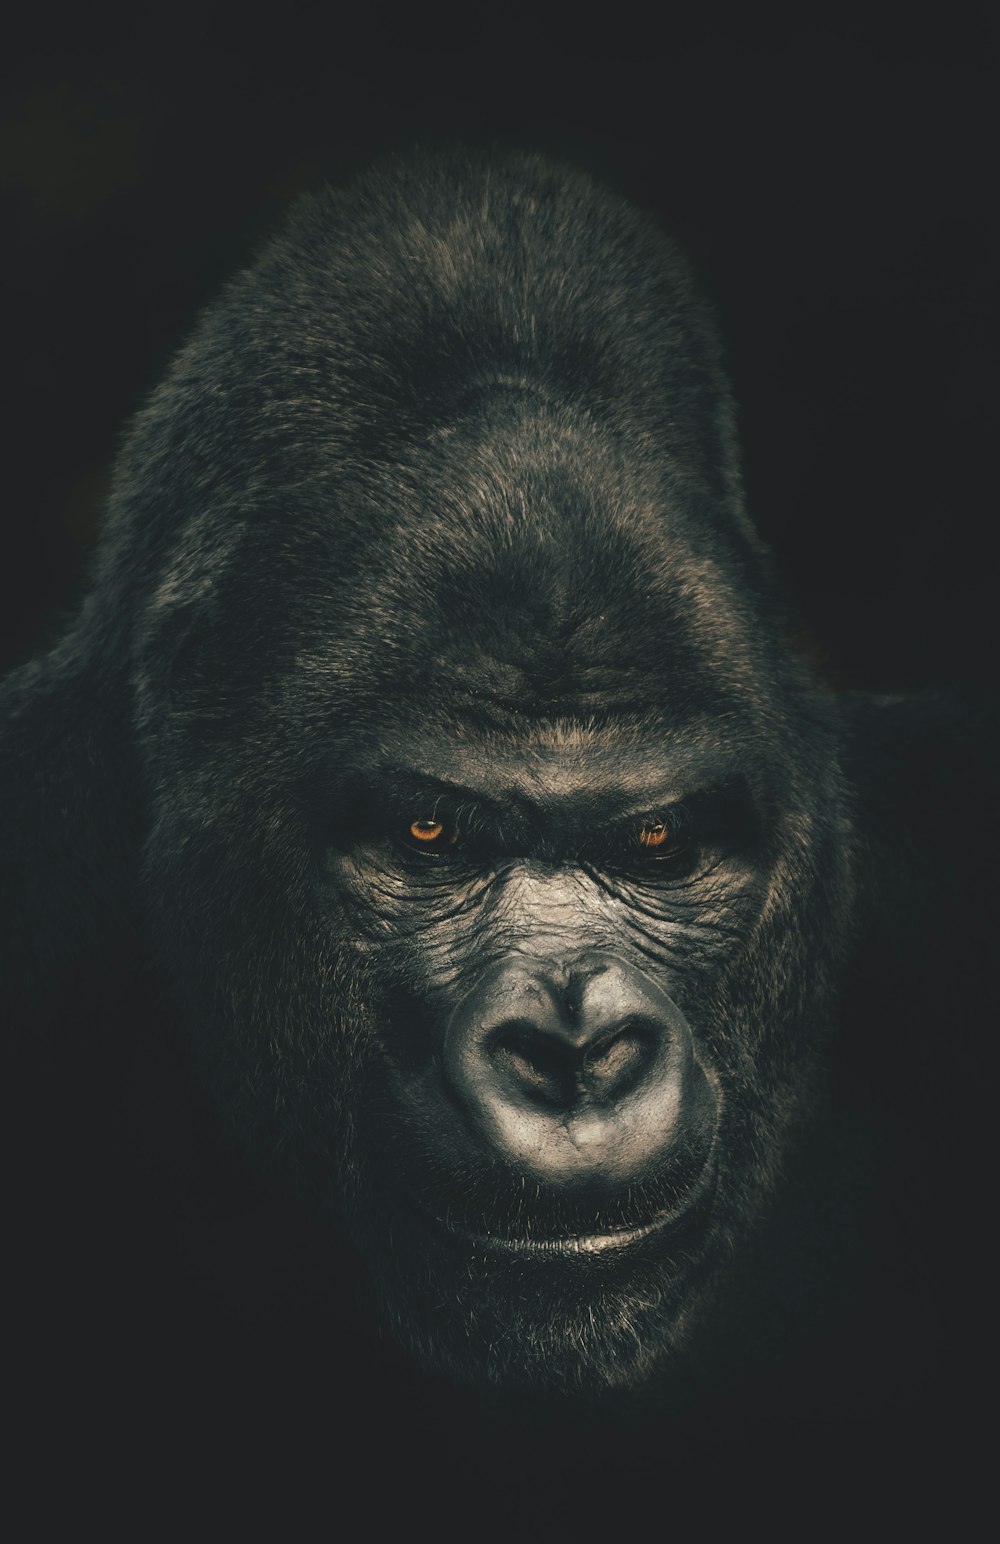 a close up of a gorilla's face with a black background